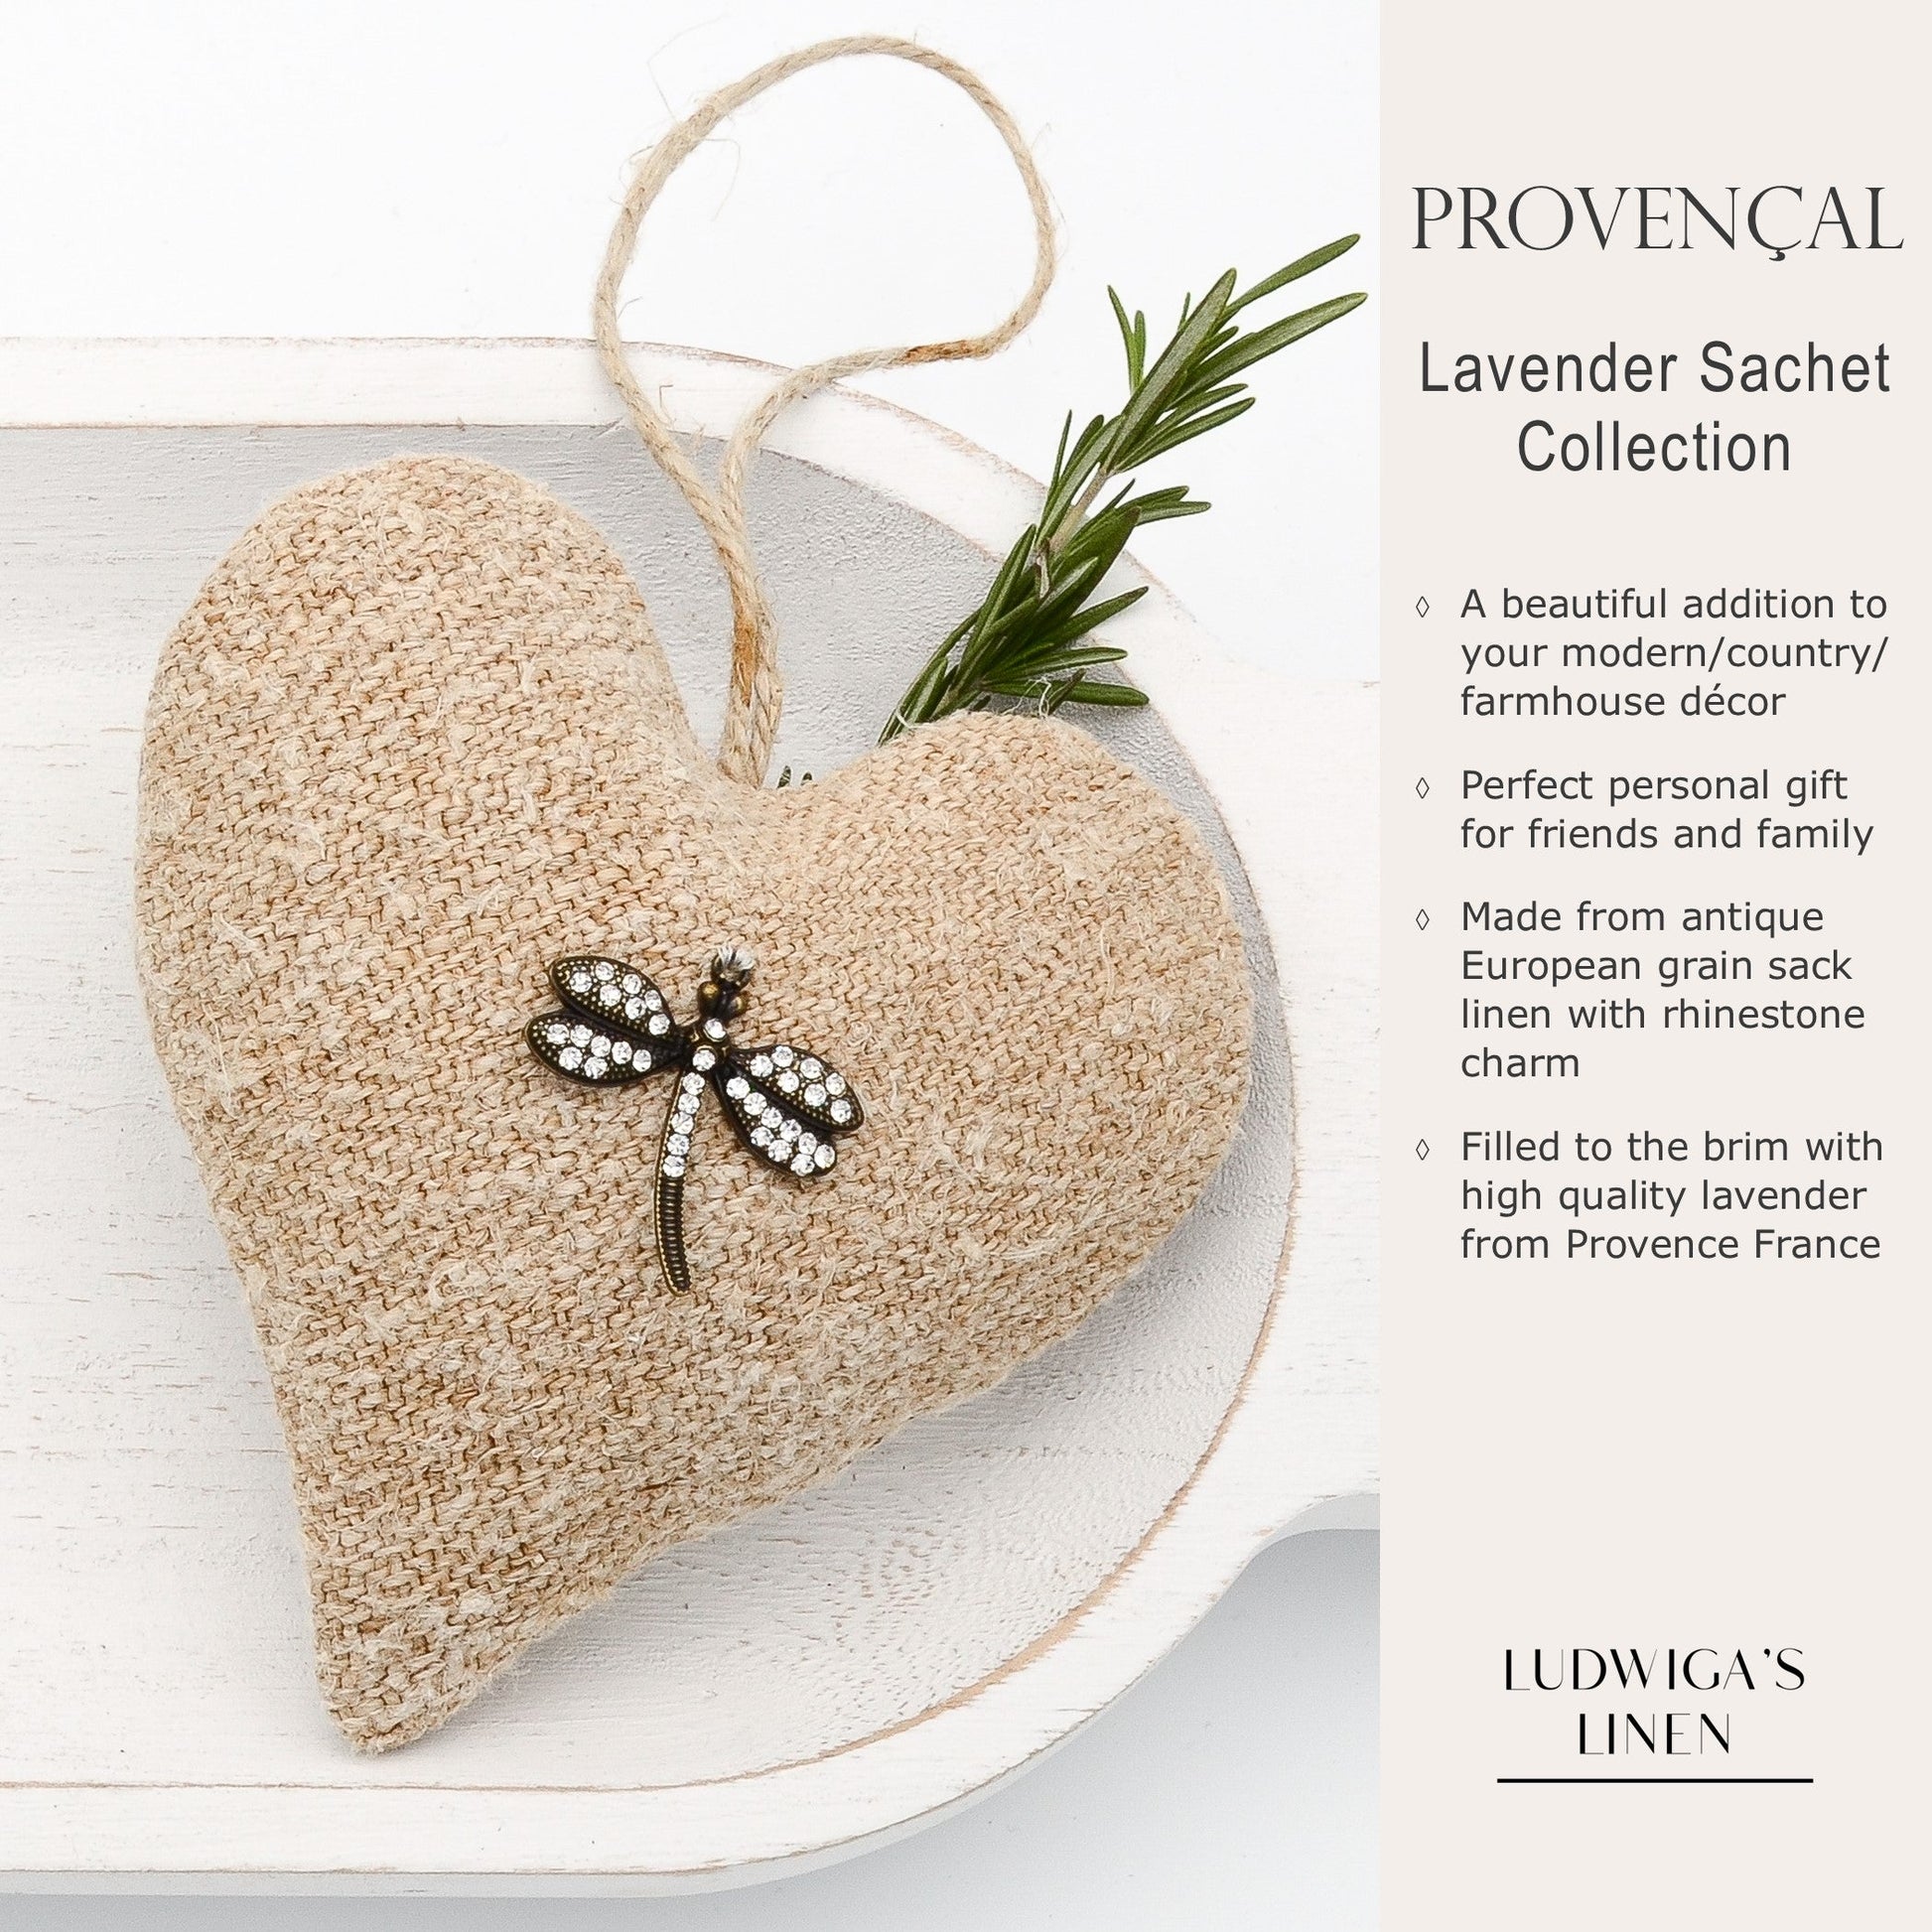 Lavender sachet heart made from antique European grain sack linen, charm, hemp twine tie, and filled with high quality lavender from Provence France